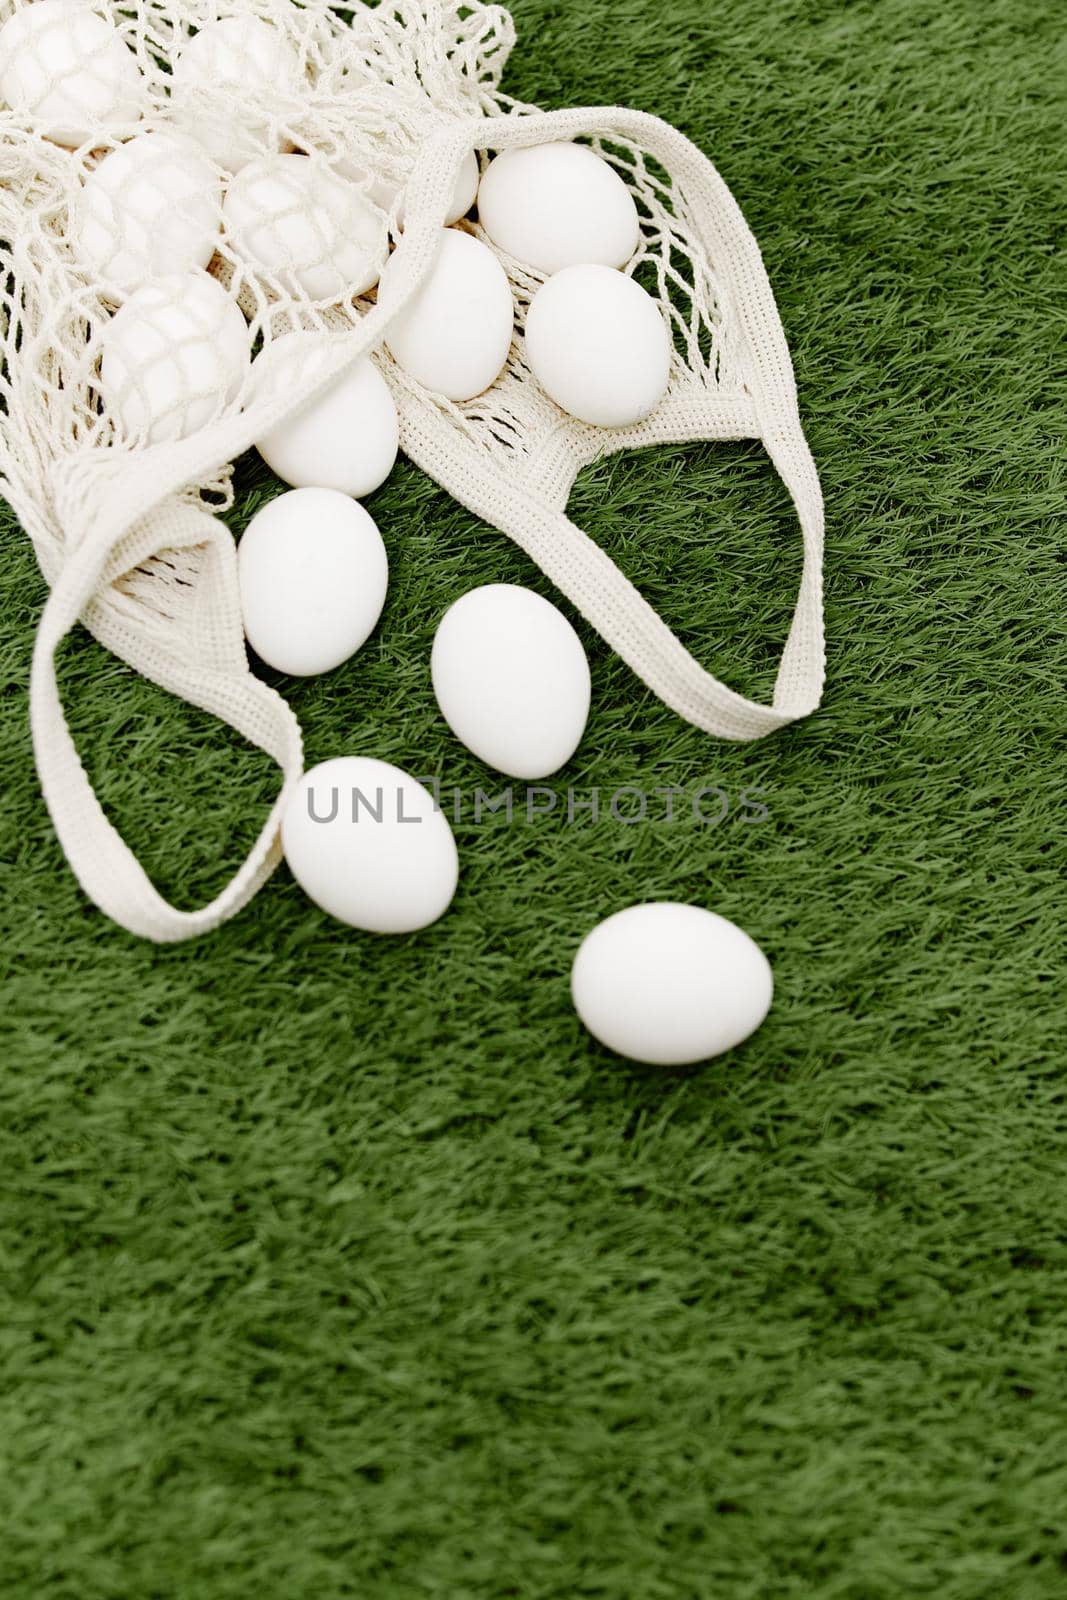 bag of white eggs chicken farm decoration top view by SHOTPRIME